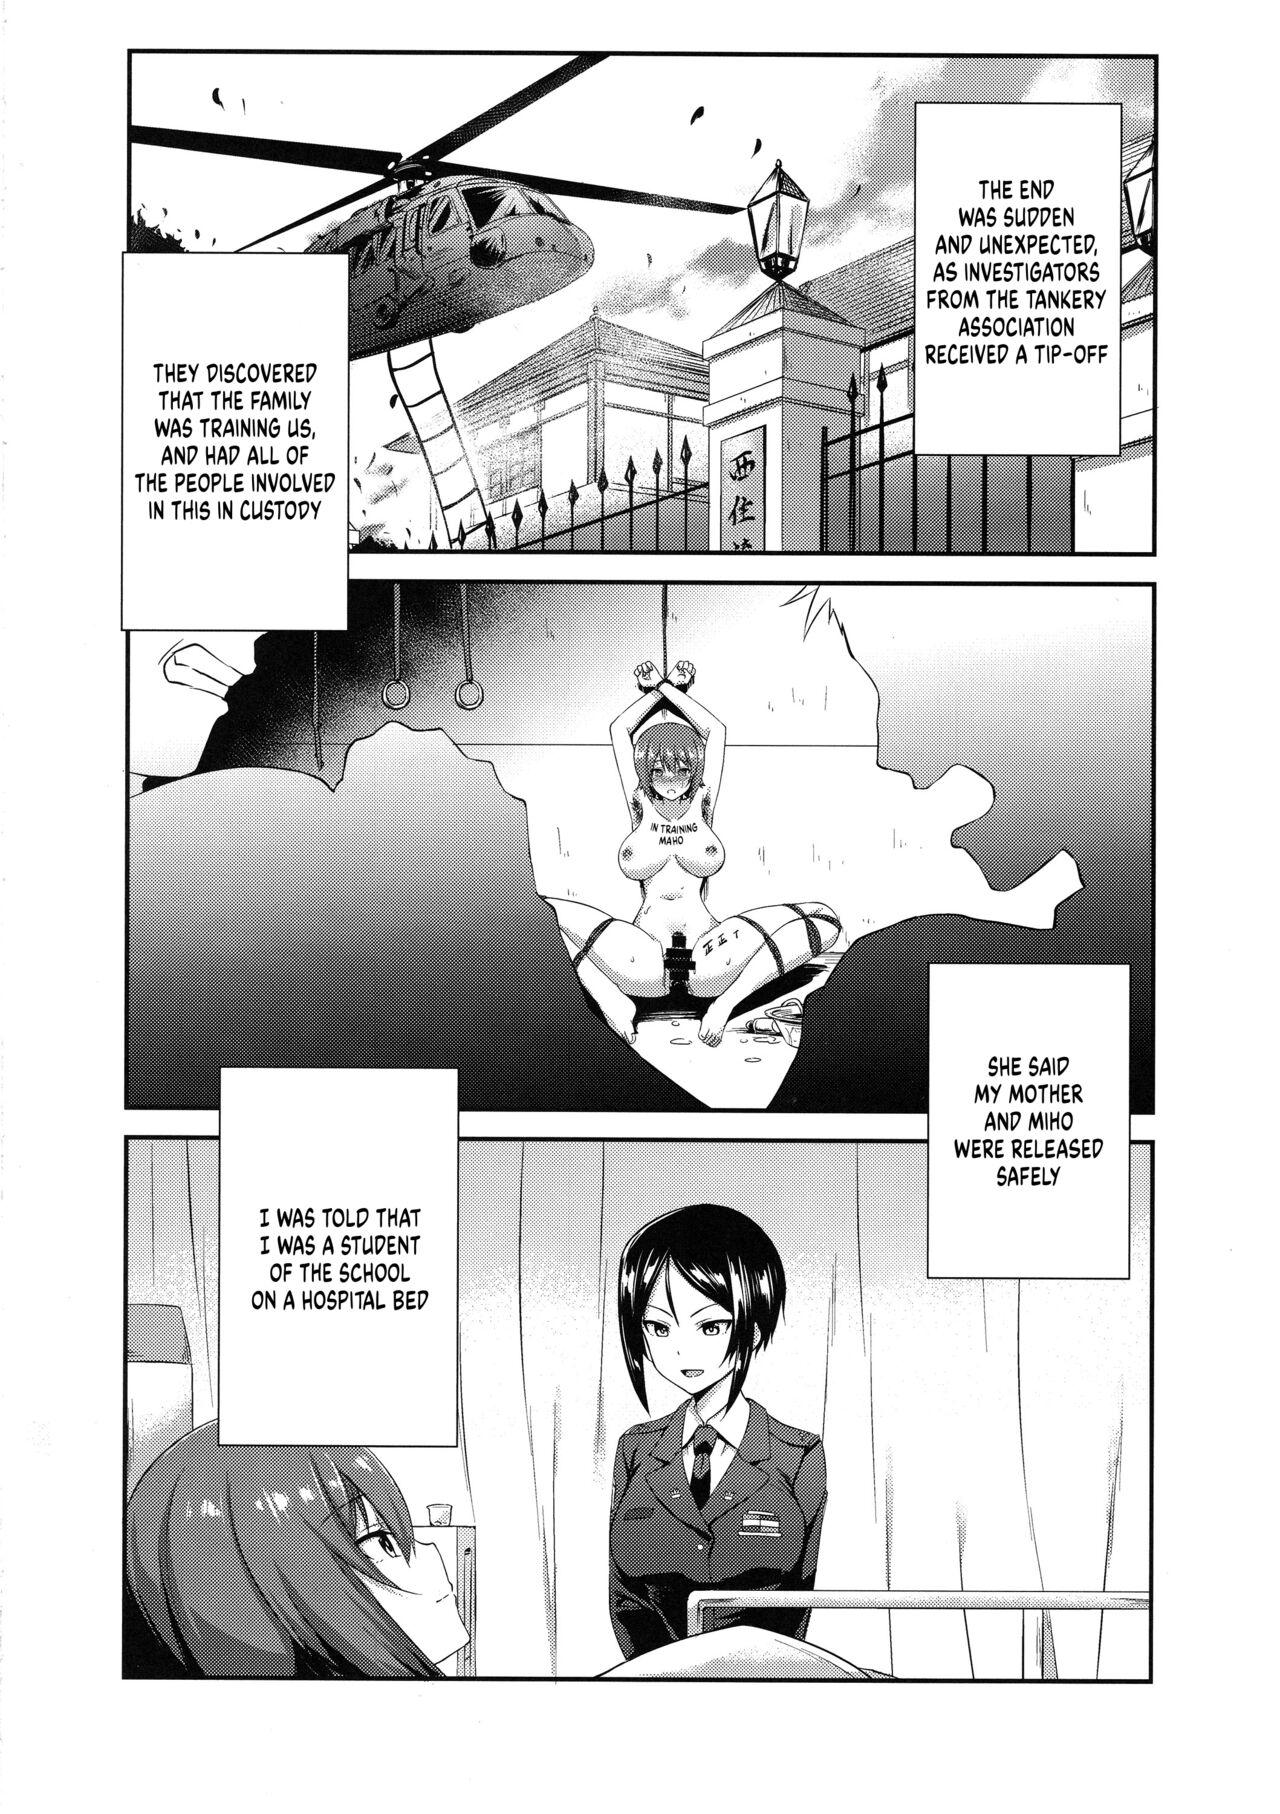 Action The Way How a Matriarch is Brought Up - Maho's Case, Top - Girls und panzer Cut - Page 5